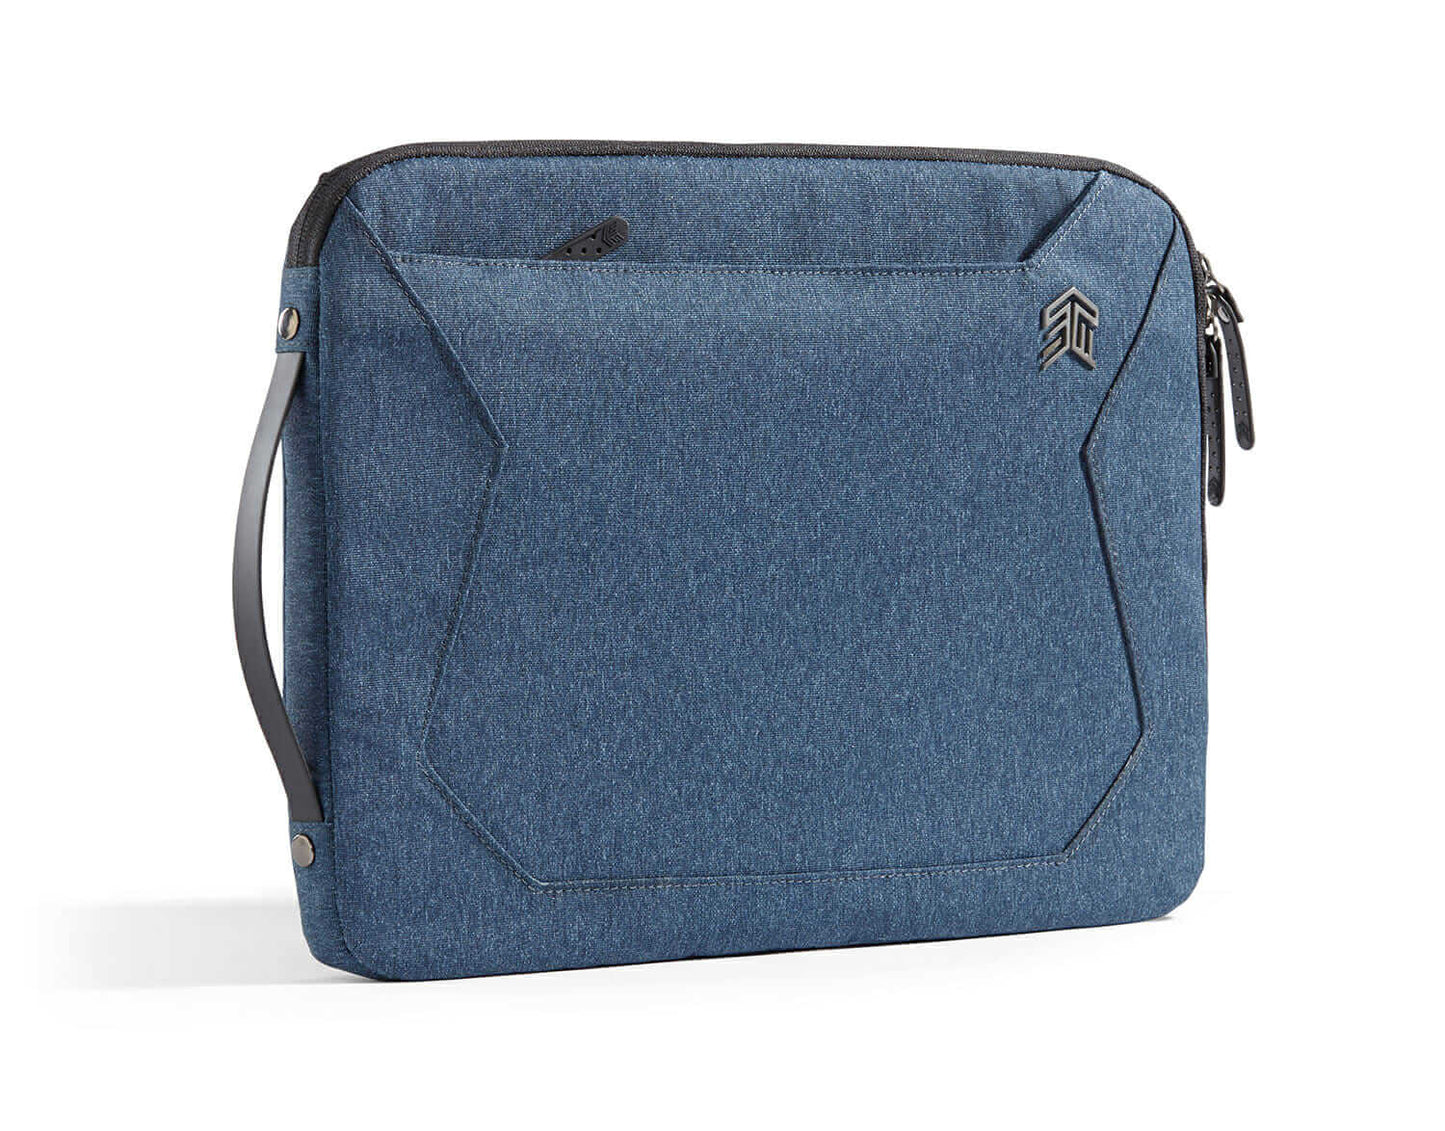 STM Myth Laptop Sleeve for MacBook Pro 16" (also fits most 15" screens), Slate Blue